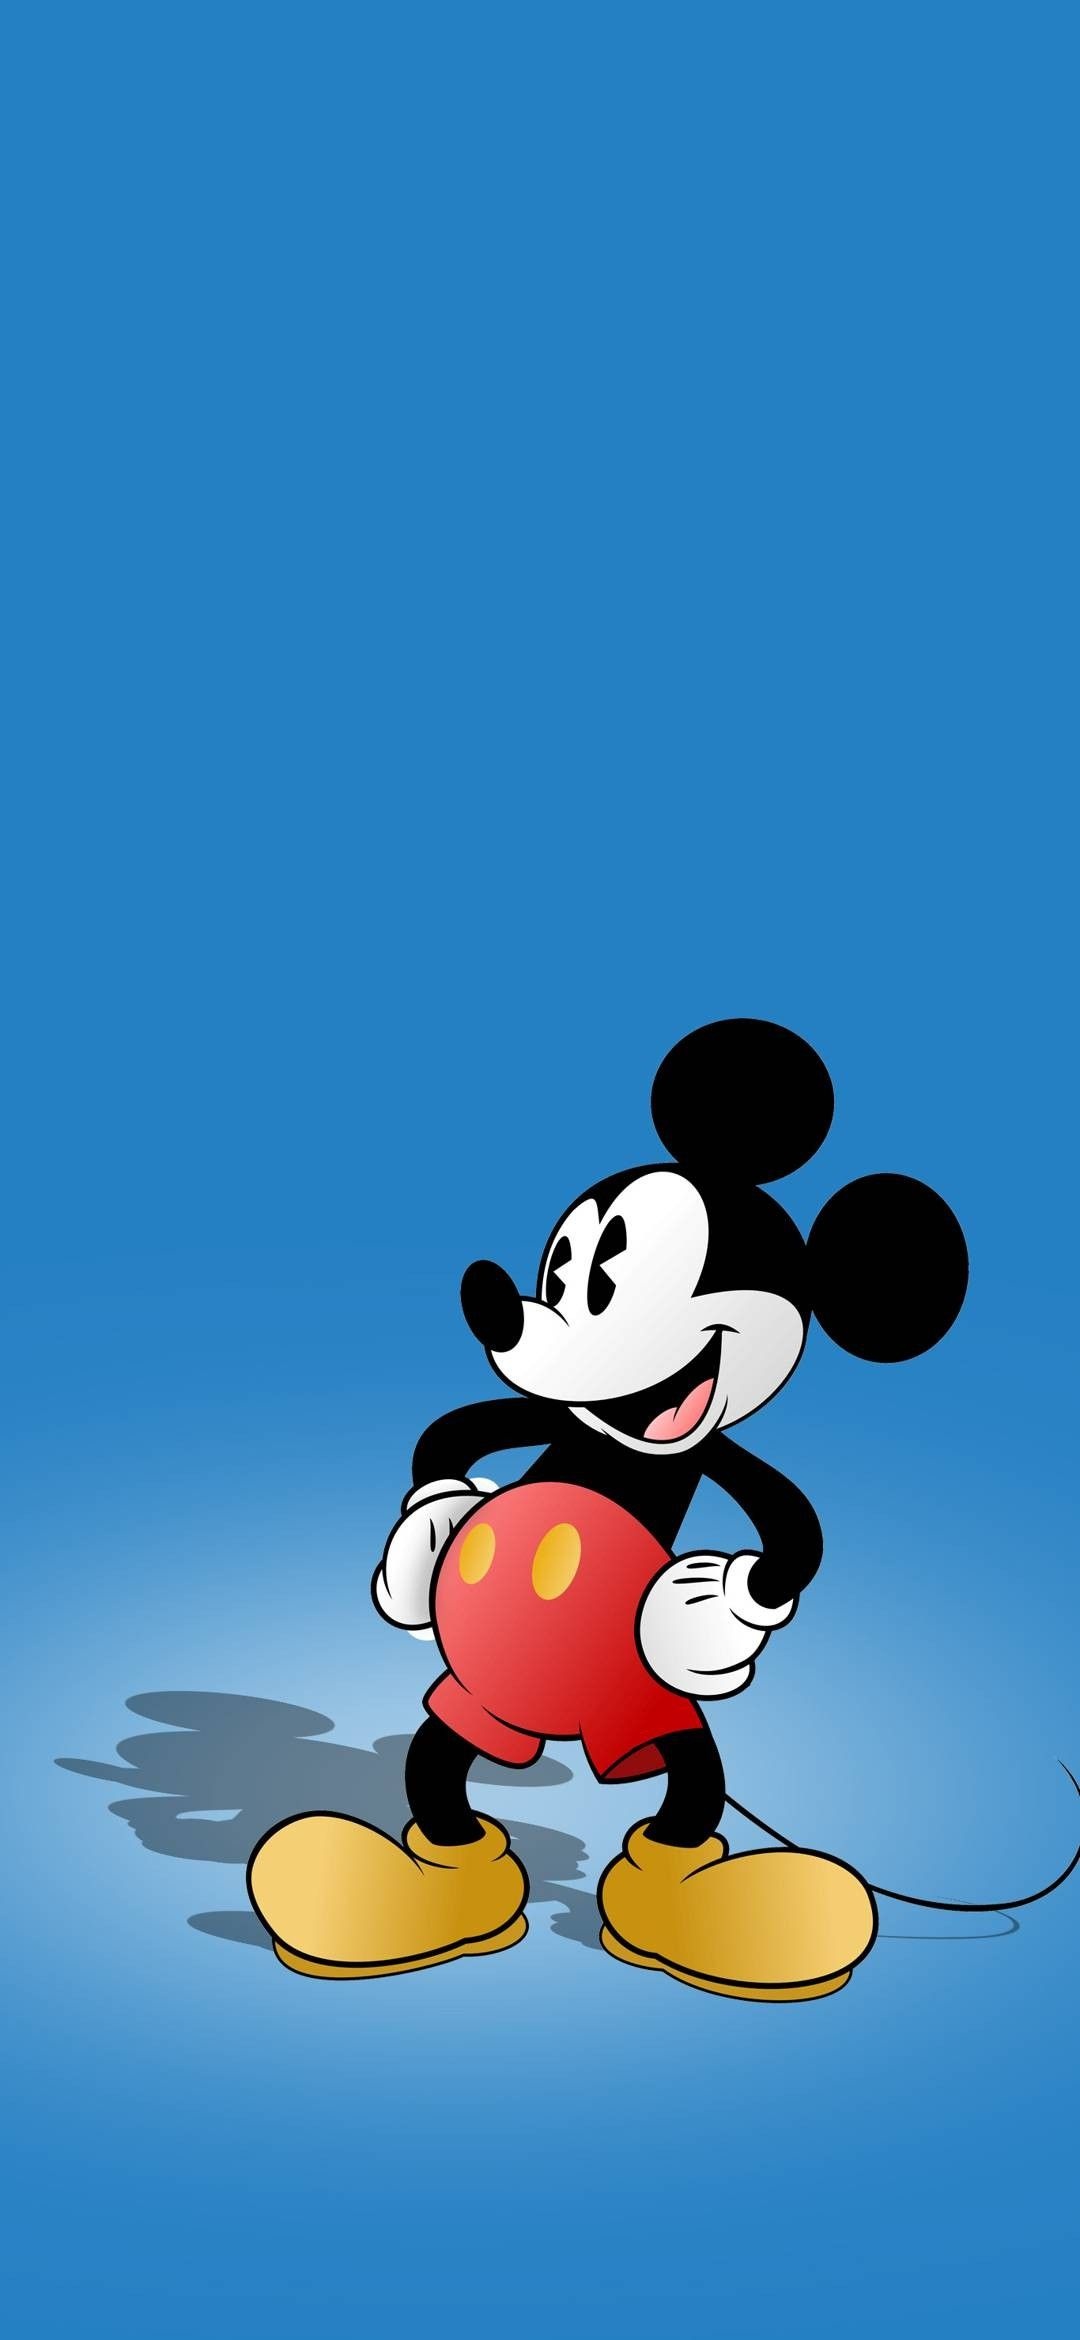 Marvel wallpapers, Mickey Mouse edition, Superhero-inspired designs, 1080x2340 HD Handy